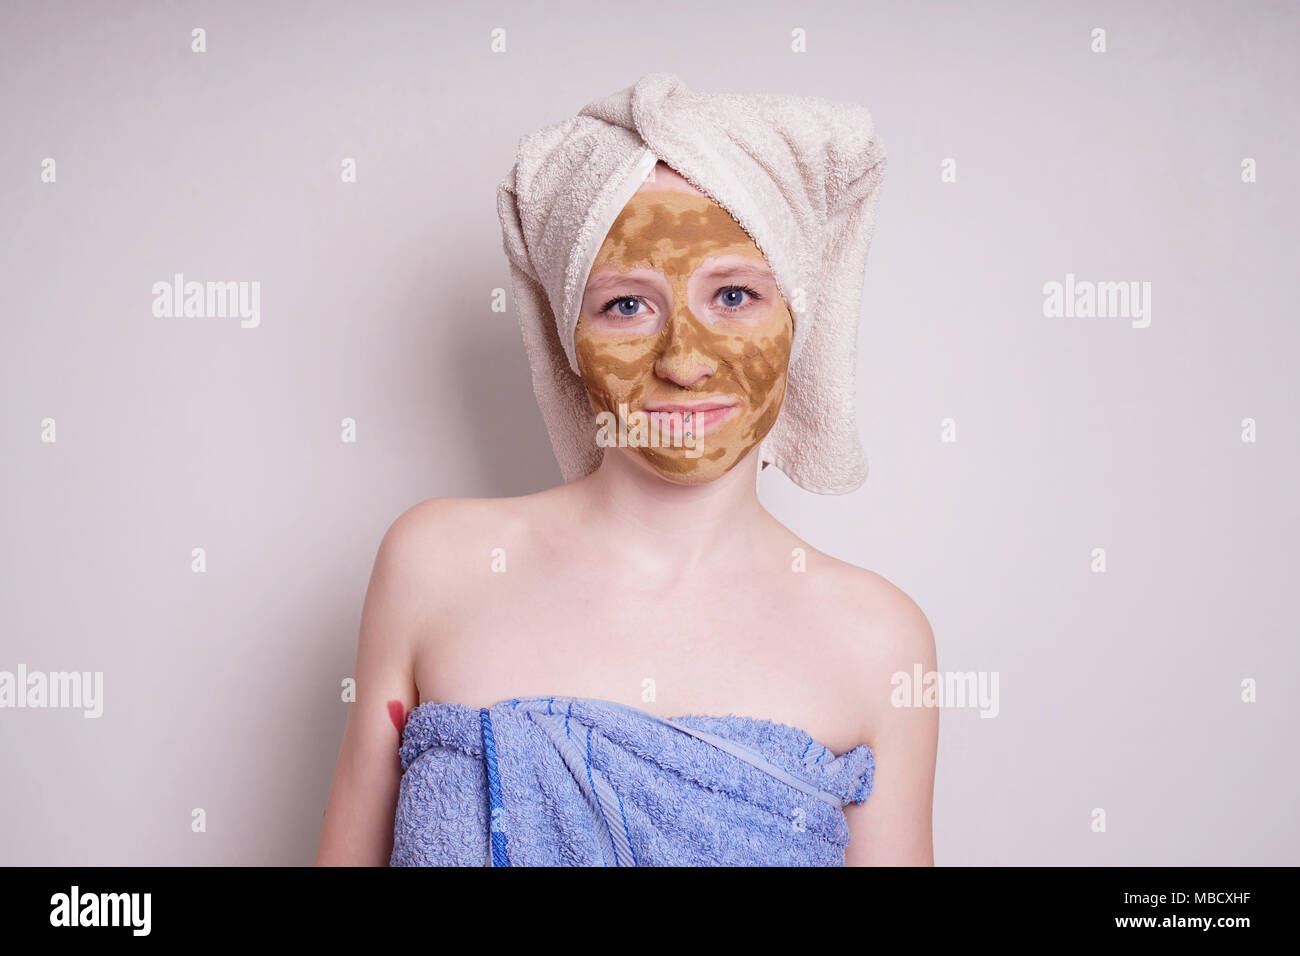 young woman with healing earth or clay beauty facial mask wrapped in towel Stock Photo